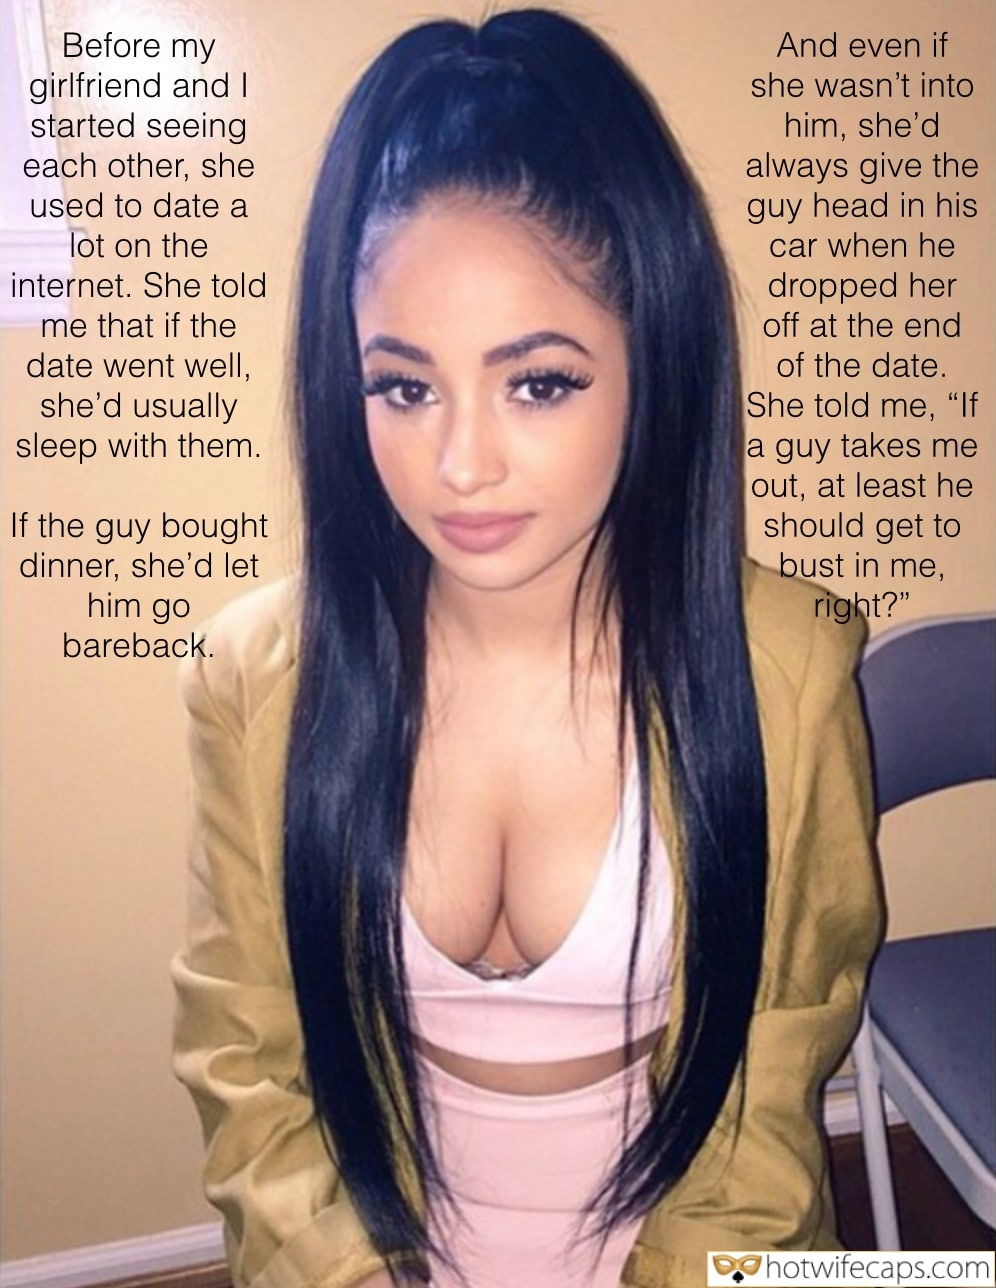 Sexy Memes Friends Creampie Cheating hotwife caption: Before my girlfriend and I started seeing each other, she used to date a lot on the internet. She told me that if the date went well, she’d usually sleep with them. If the guy bought dinner, she’d let him...